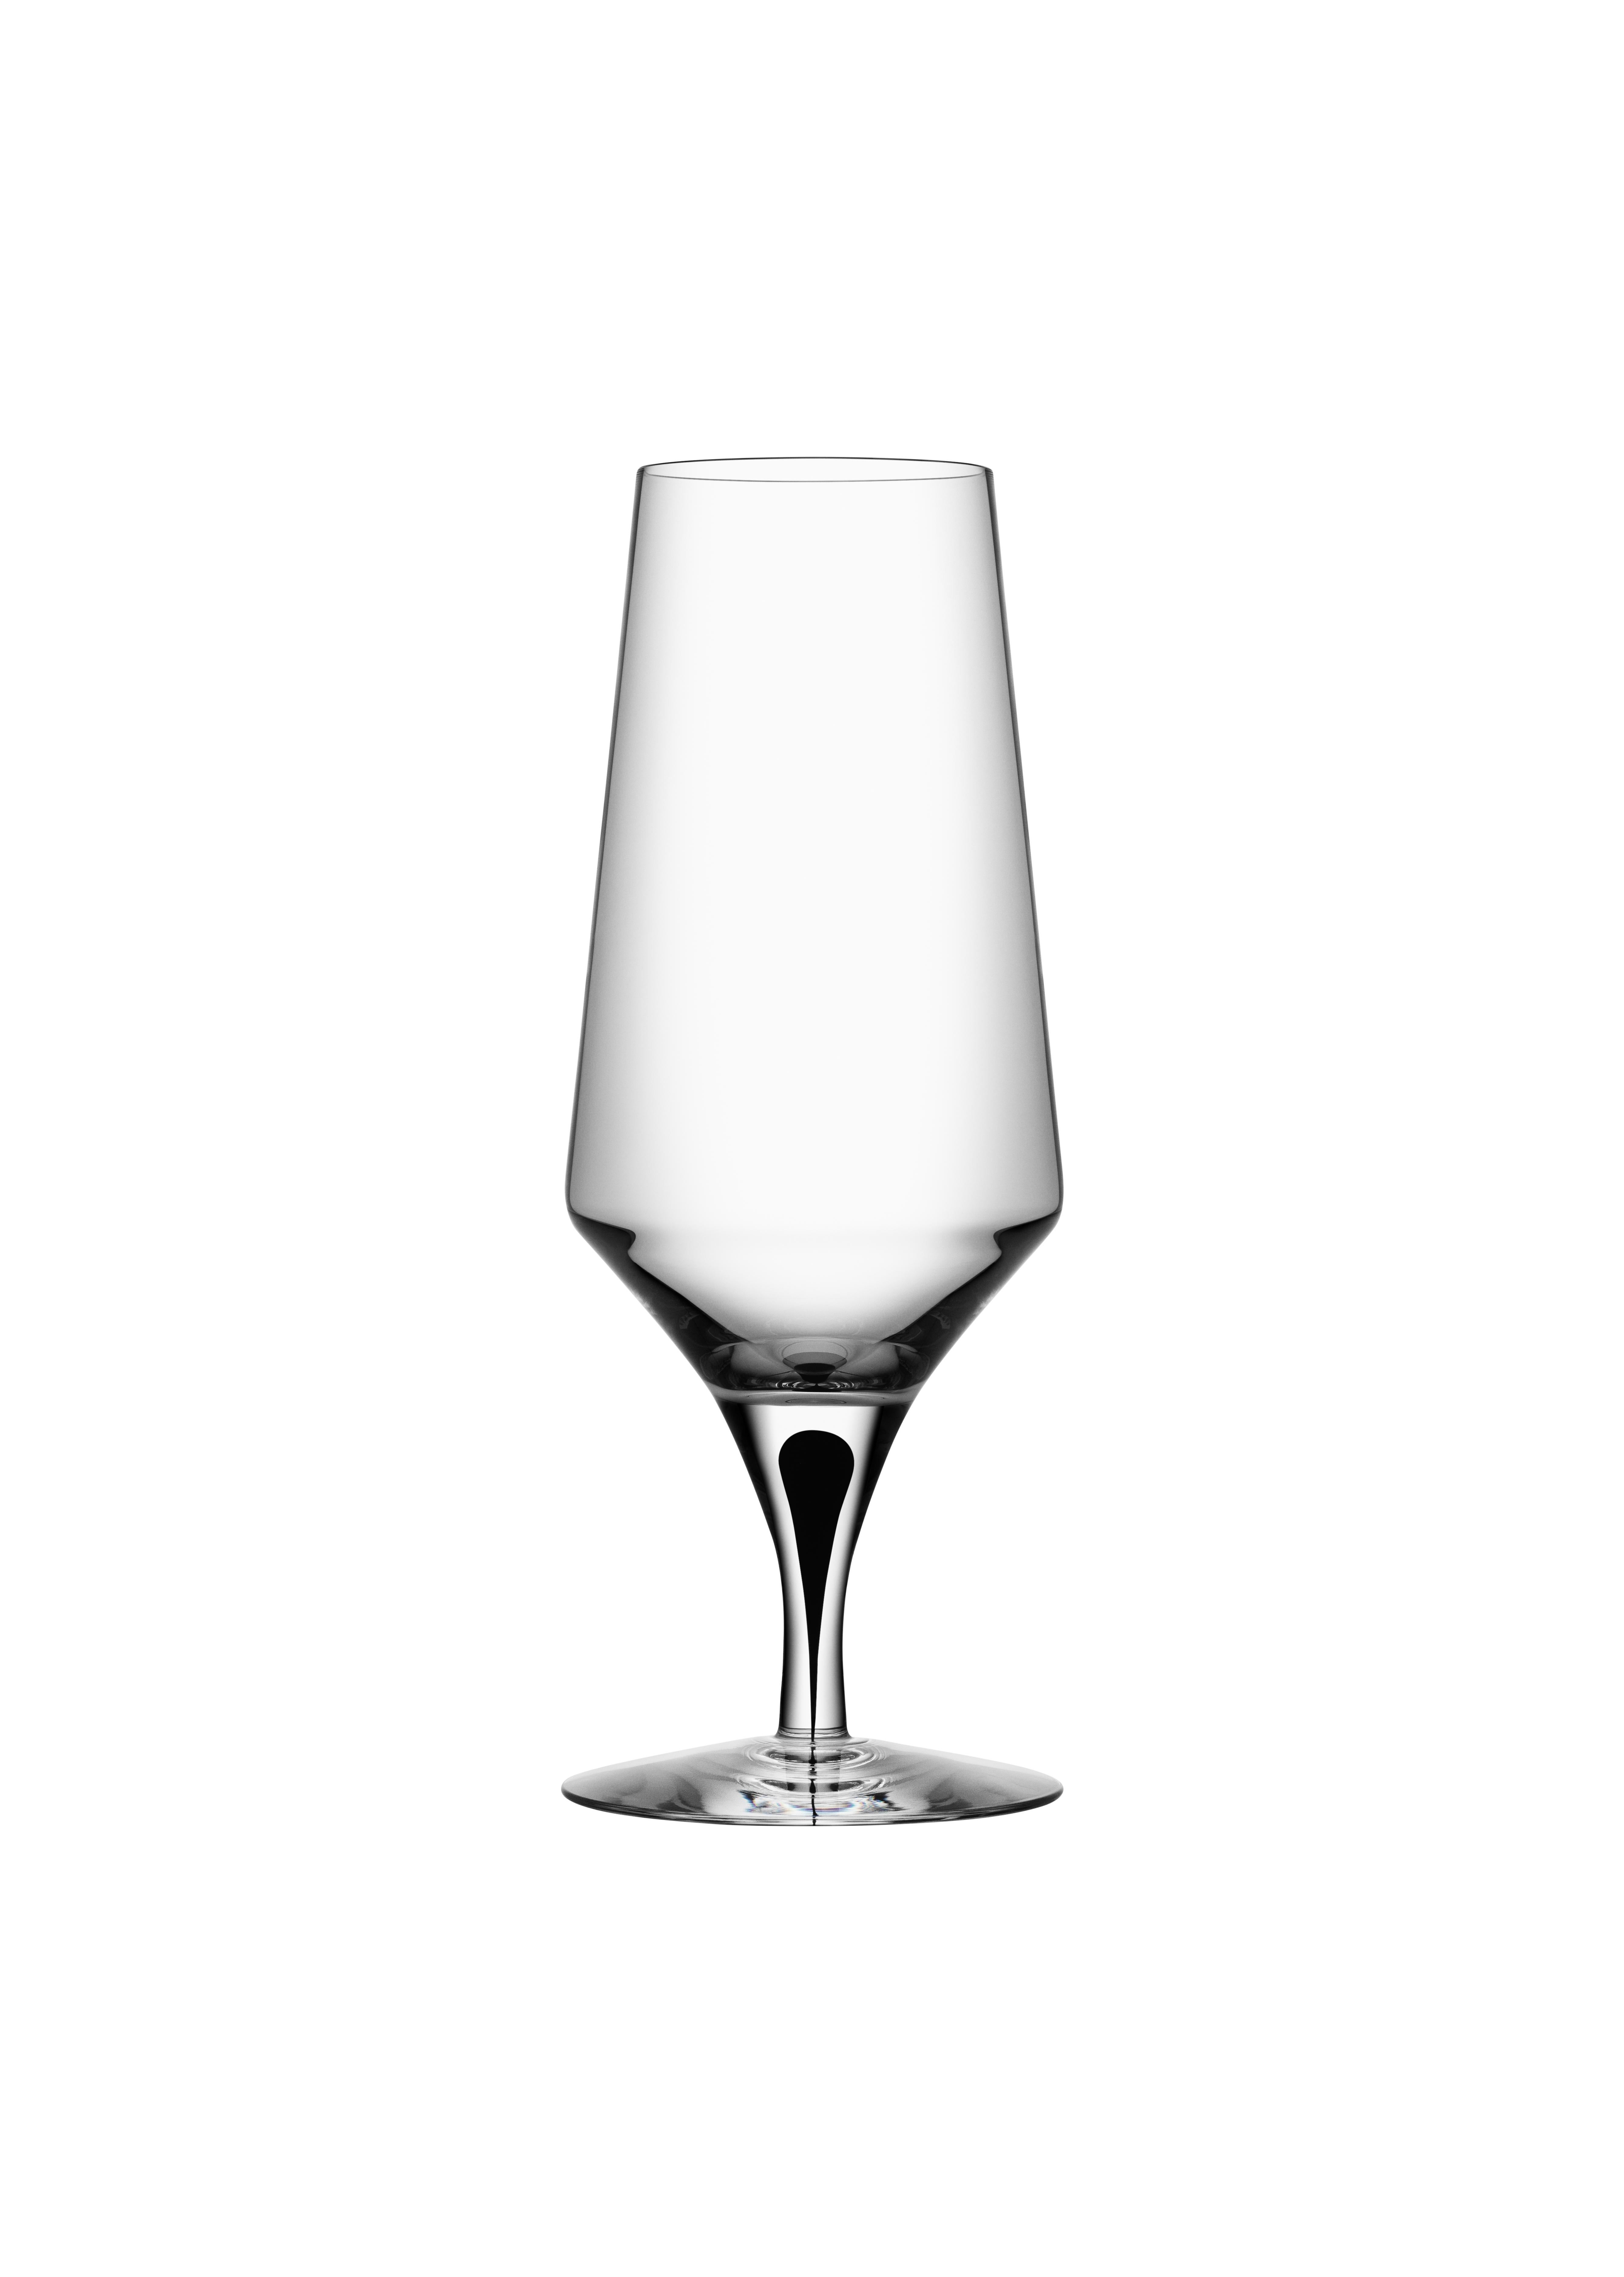 Metropol Beer from Orrefors, which holds 15.5 oz, is outstanding for many kinds of beer, including lager, pilsner, and IPA. The beer glass is mouth-blown in Sweden by expert glassblowers and inspired by Erika Lagerbielke’s classic Intermezzo design,